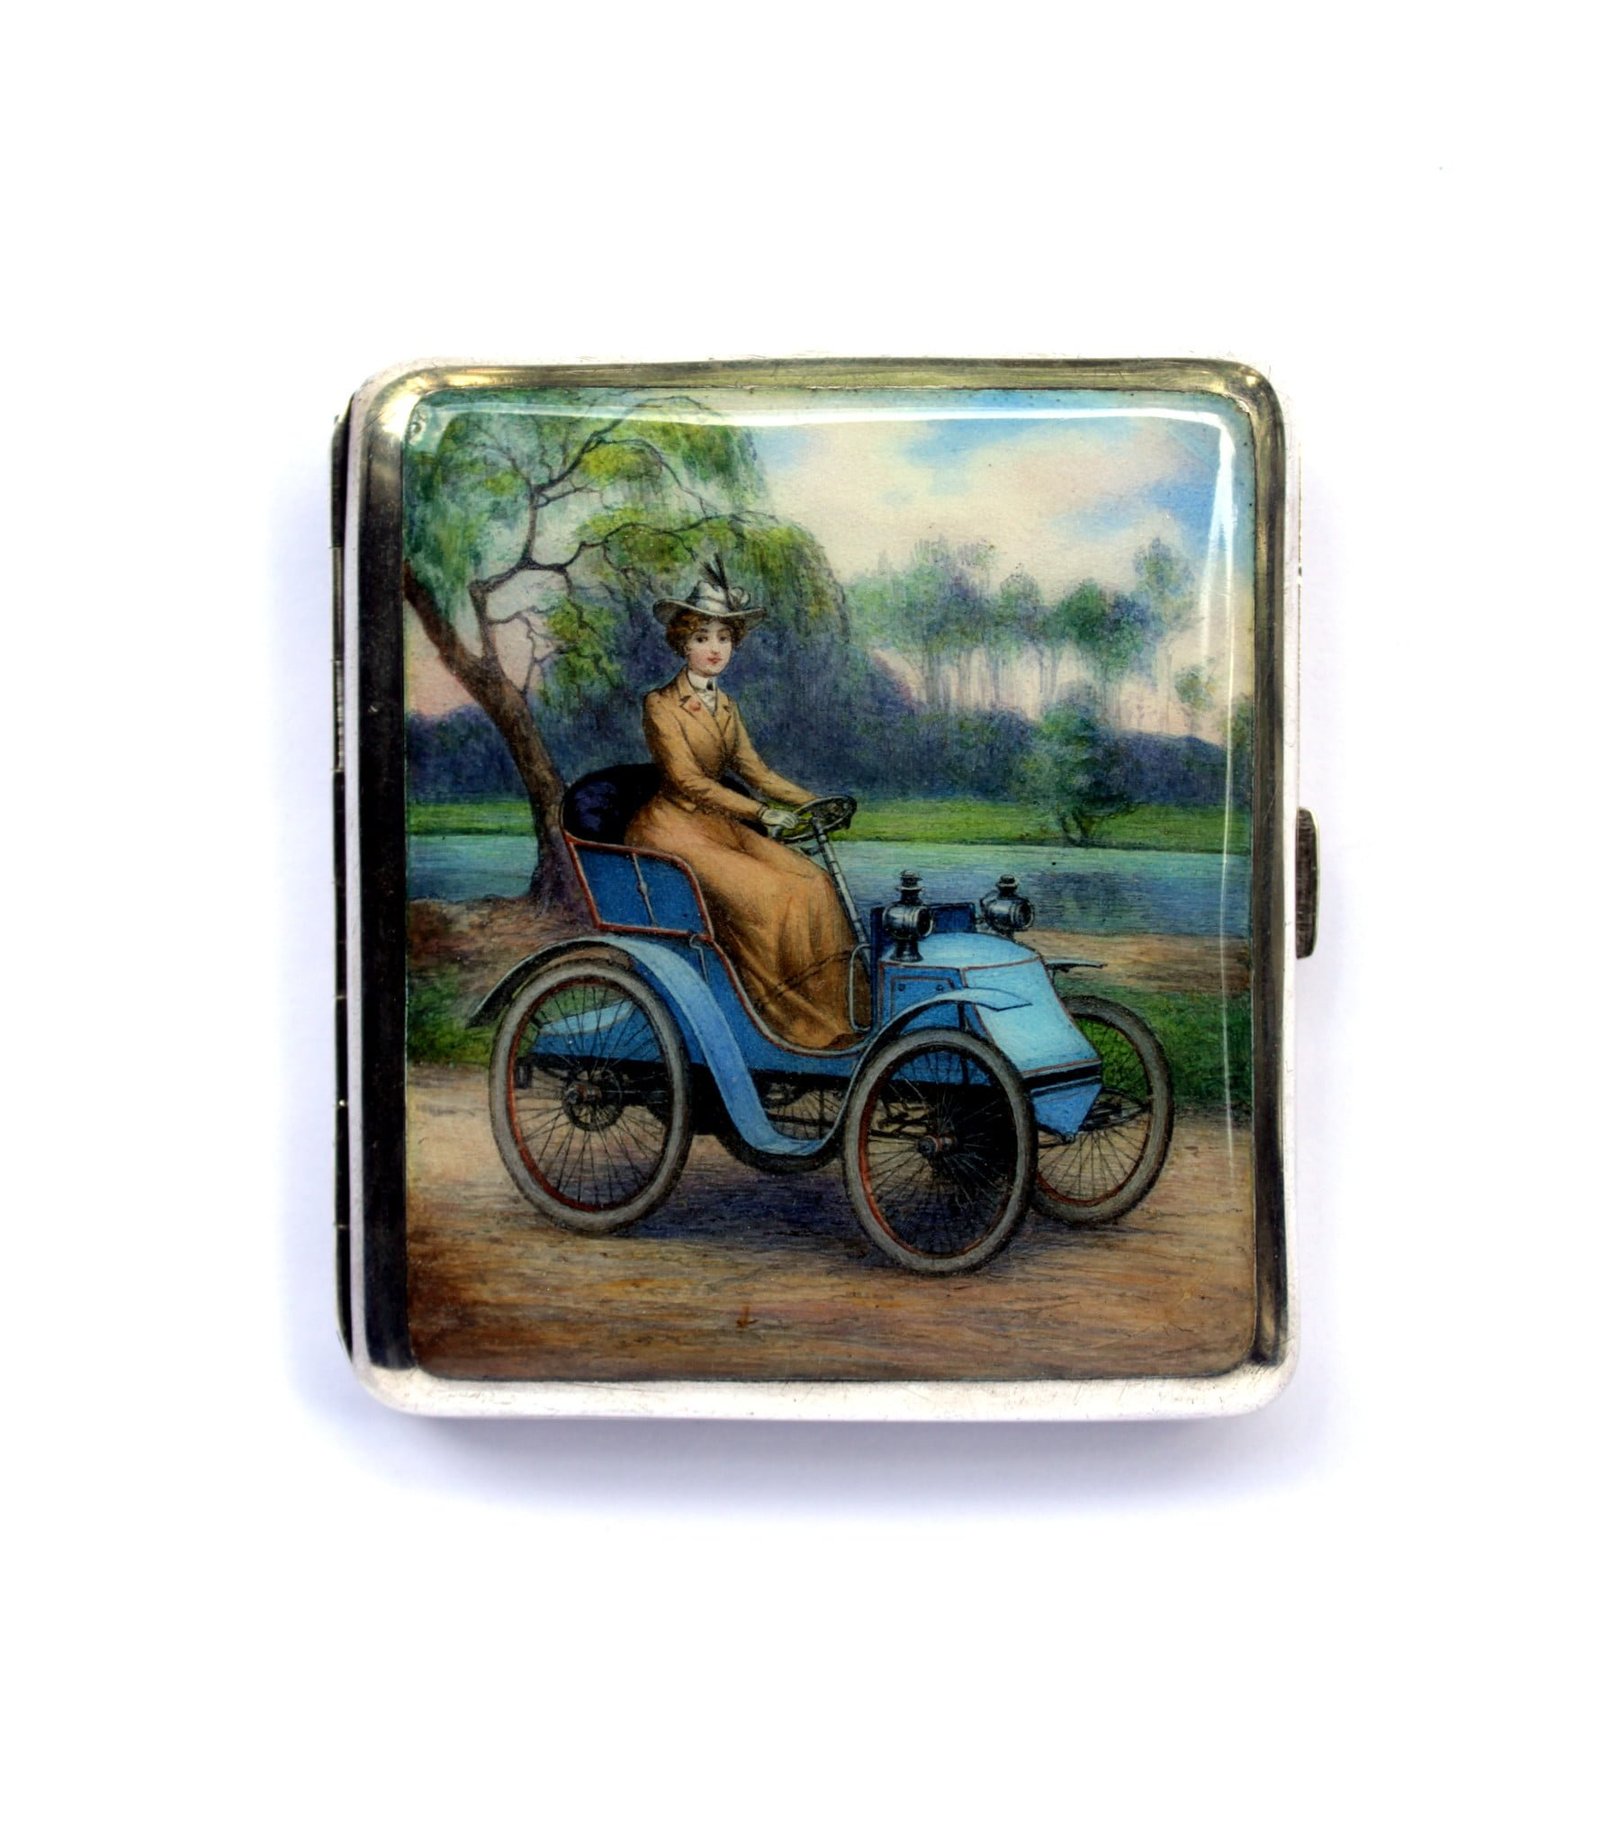 c.1900 Austrian silver and enamel cigarette case with a lady and a period motor car. Fantastic detail of the car, female figure and background.